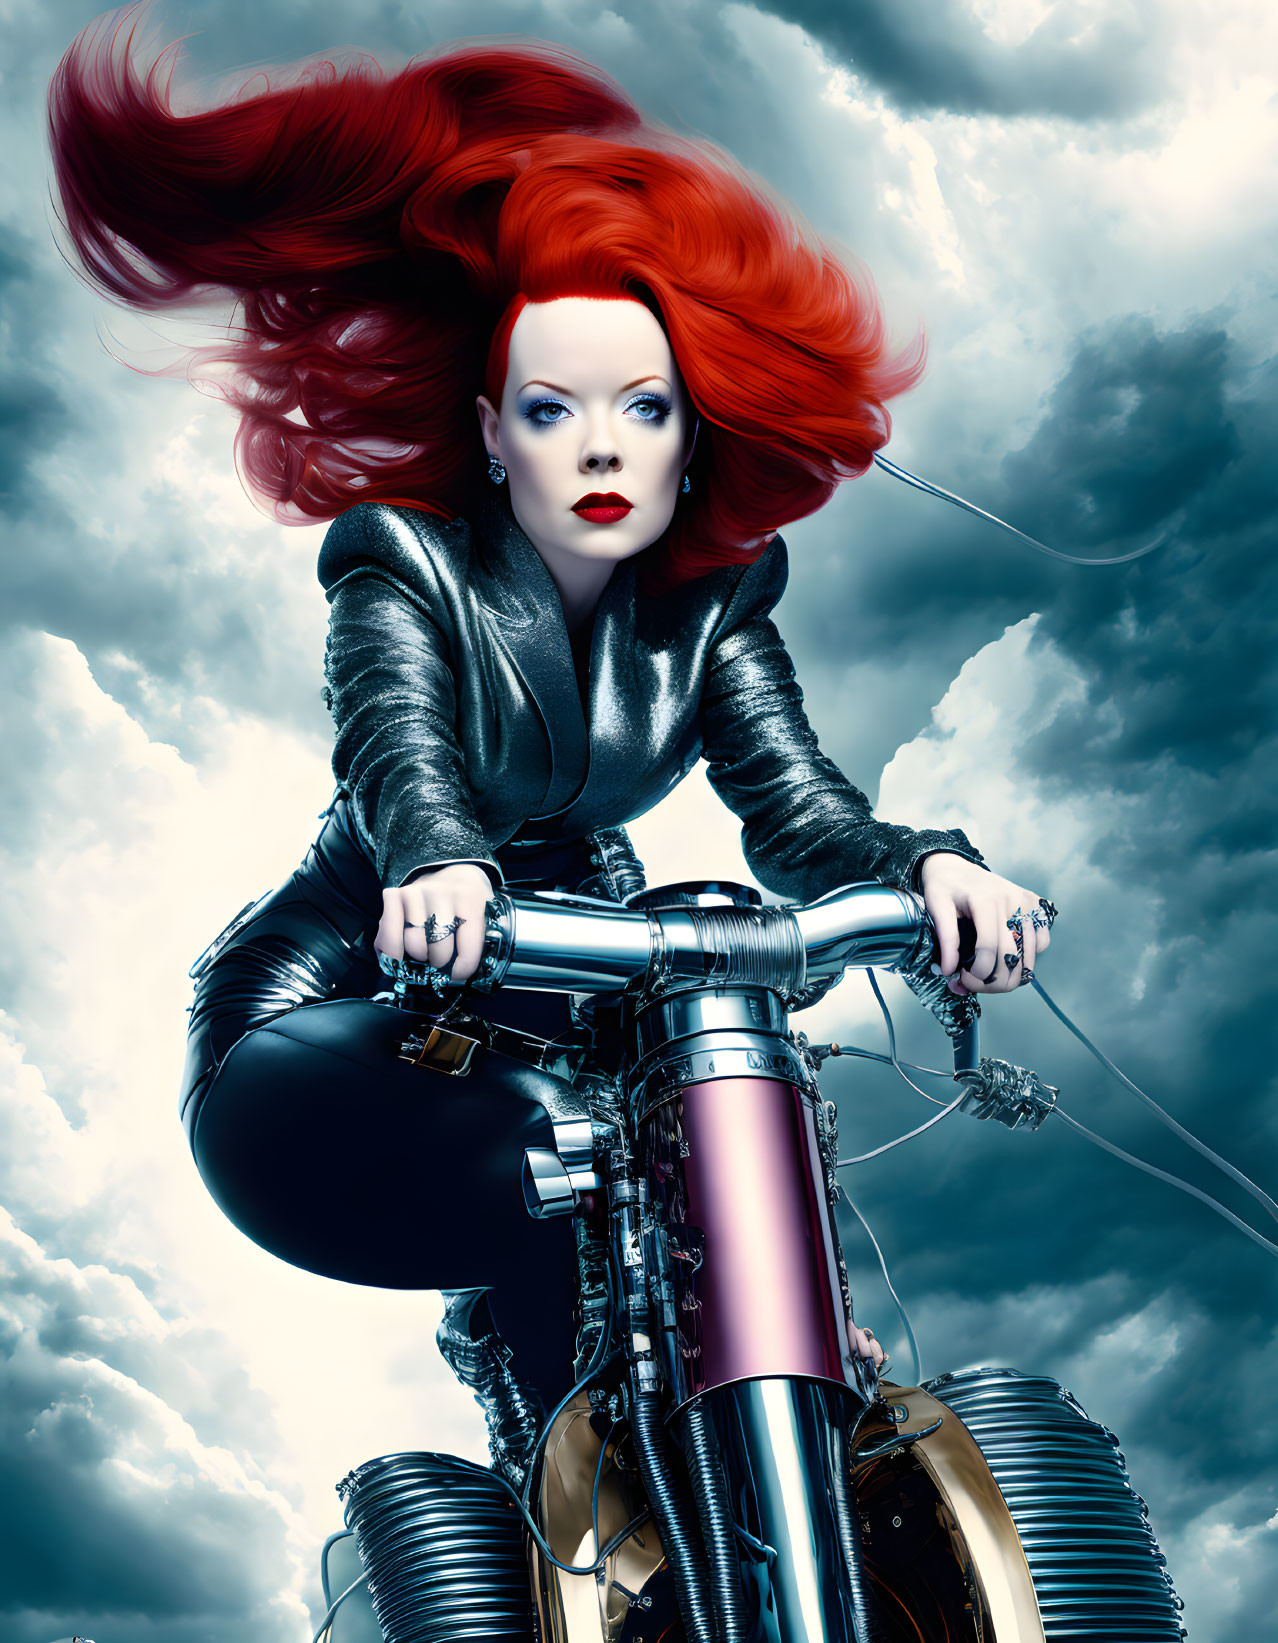 Woman with vibrant red hair riding motorcycle under dramatic sky